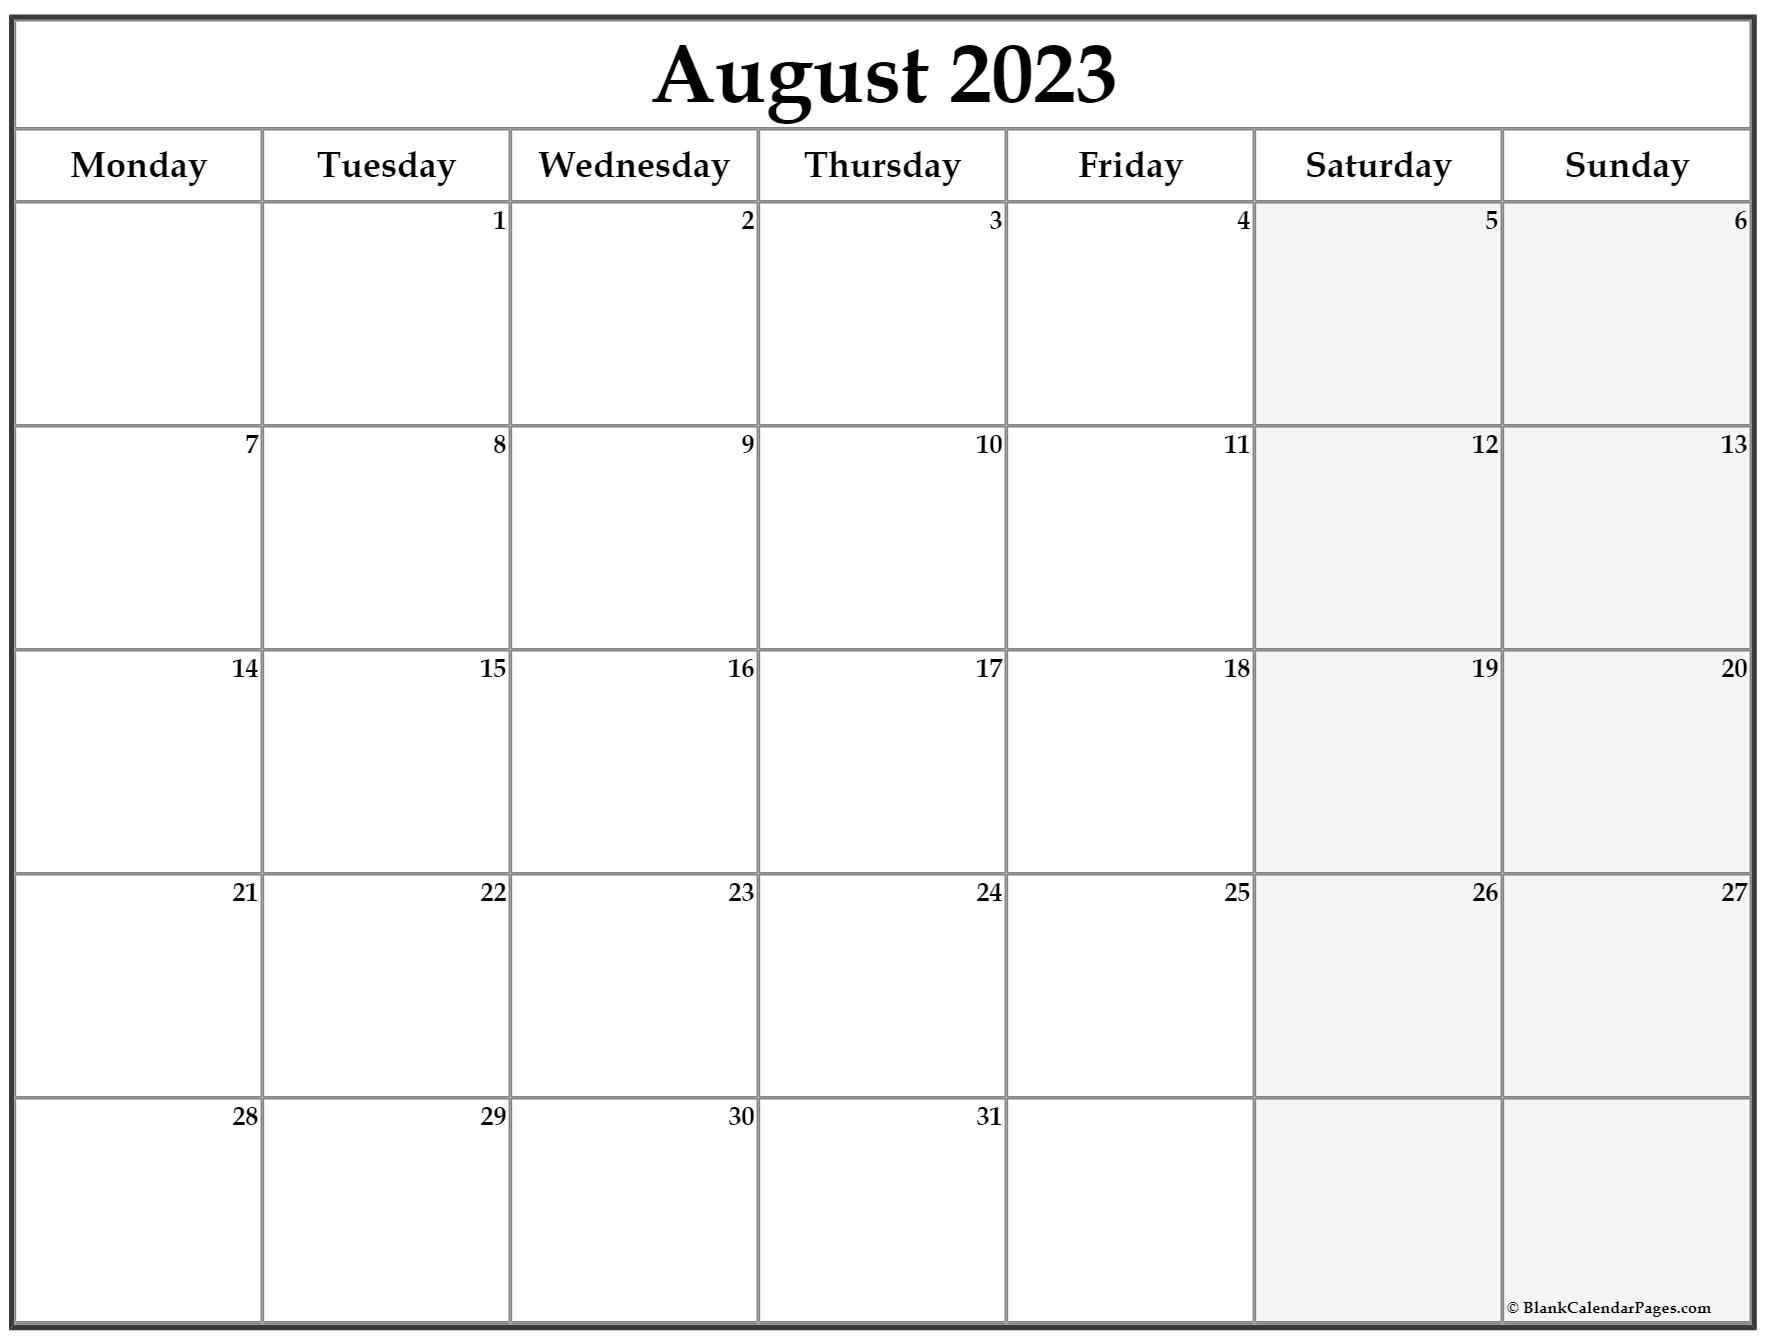 August, 2023